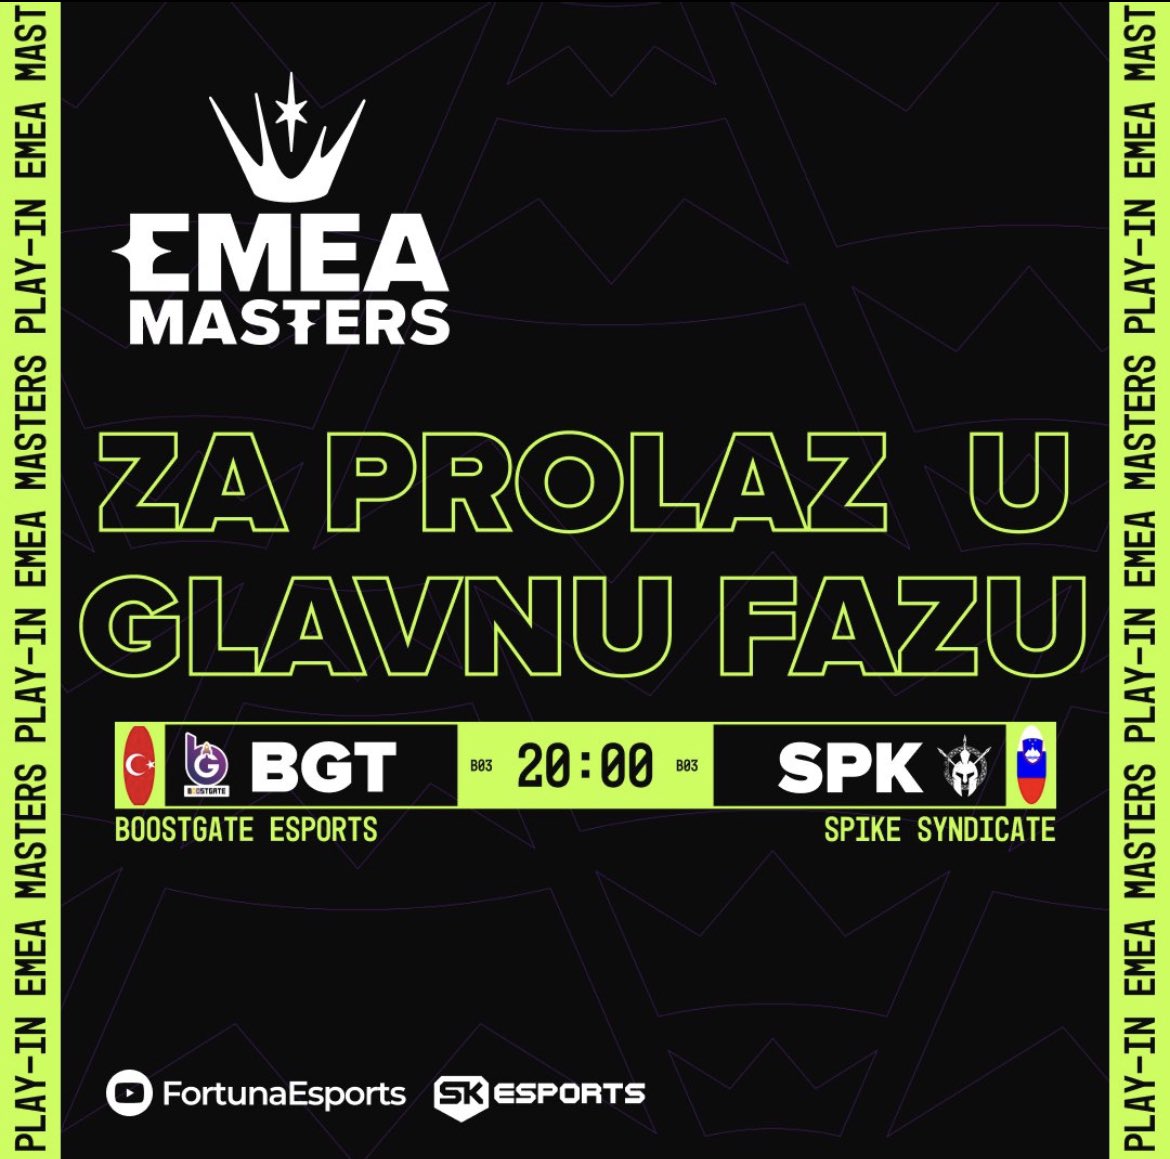 One more step to the main stage! 🚀 Join us tonight at 20:00 (CET) as we face off against @boostgateesport ⚔️ Catch the action live on @FortunaEsports YouTube channel. #spikesyndicate⚔️ #emeamasters